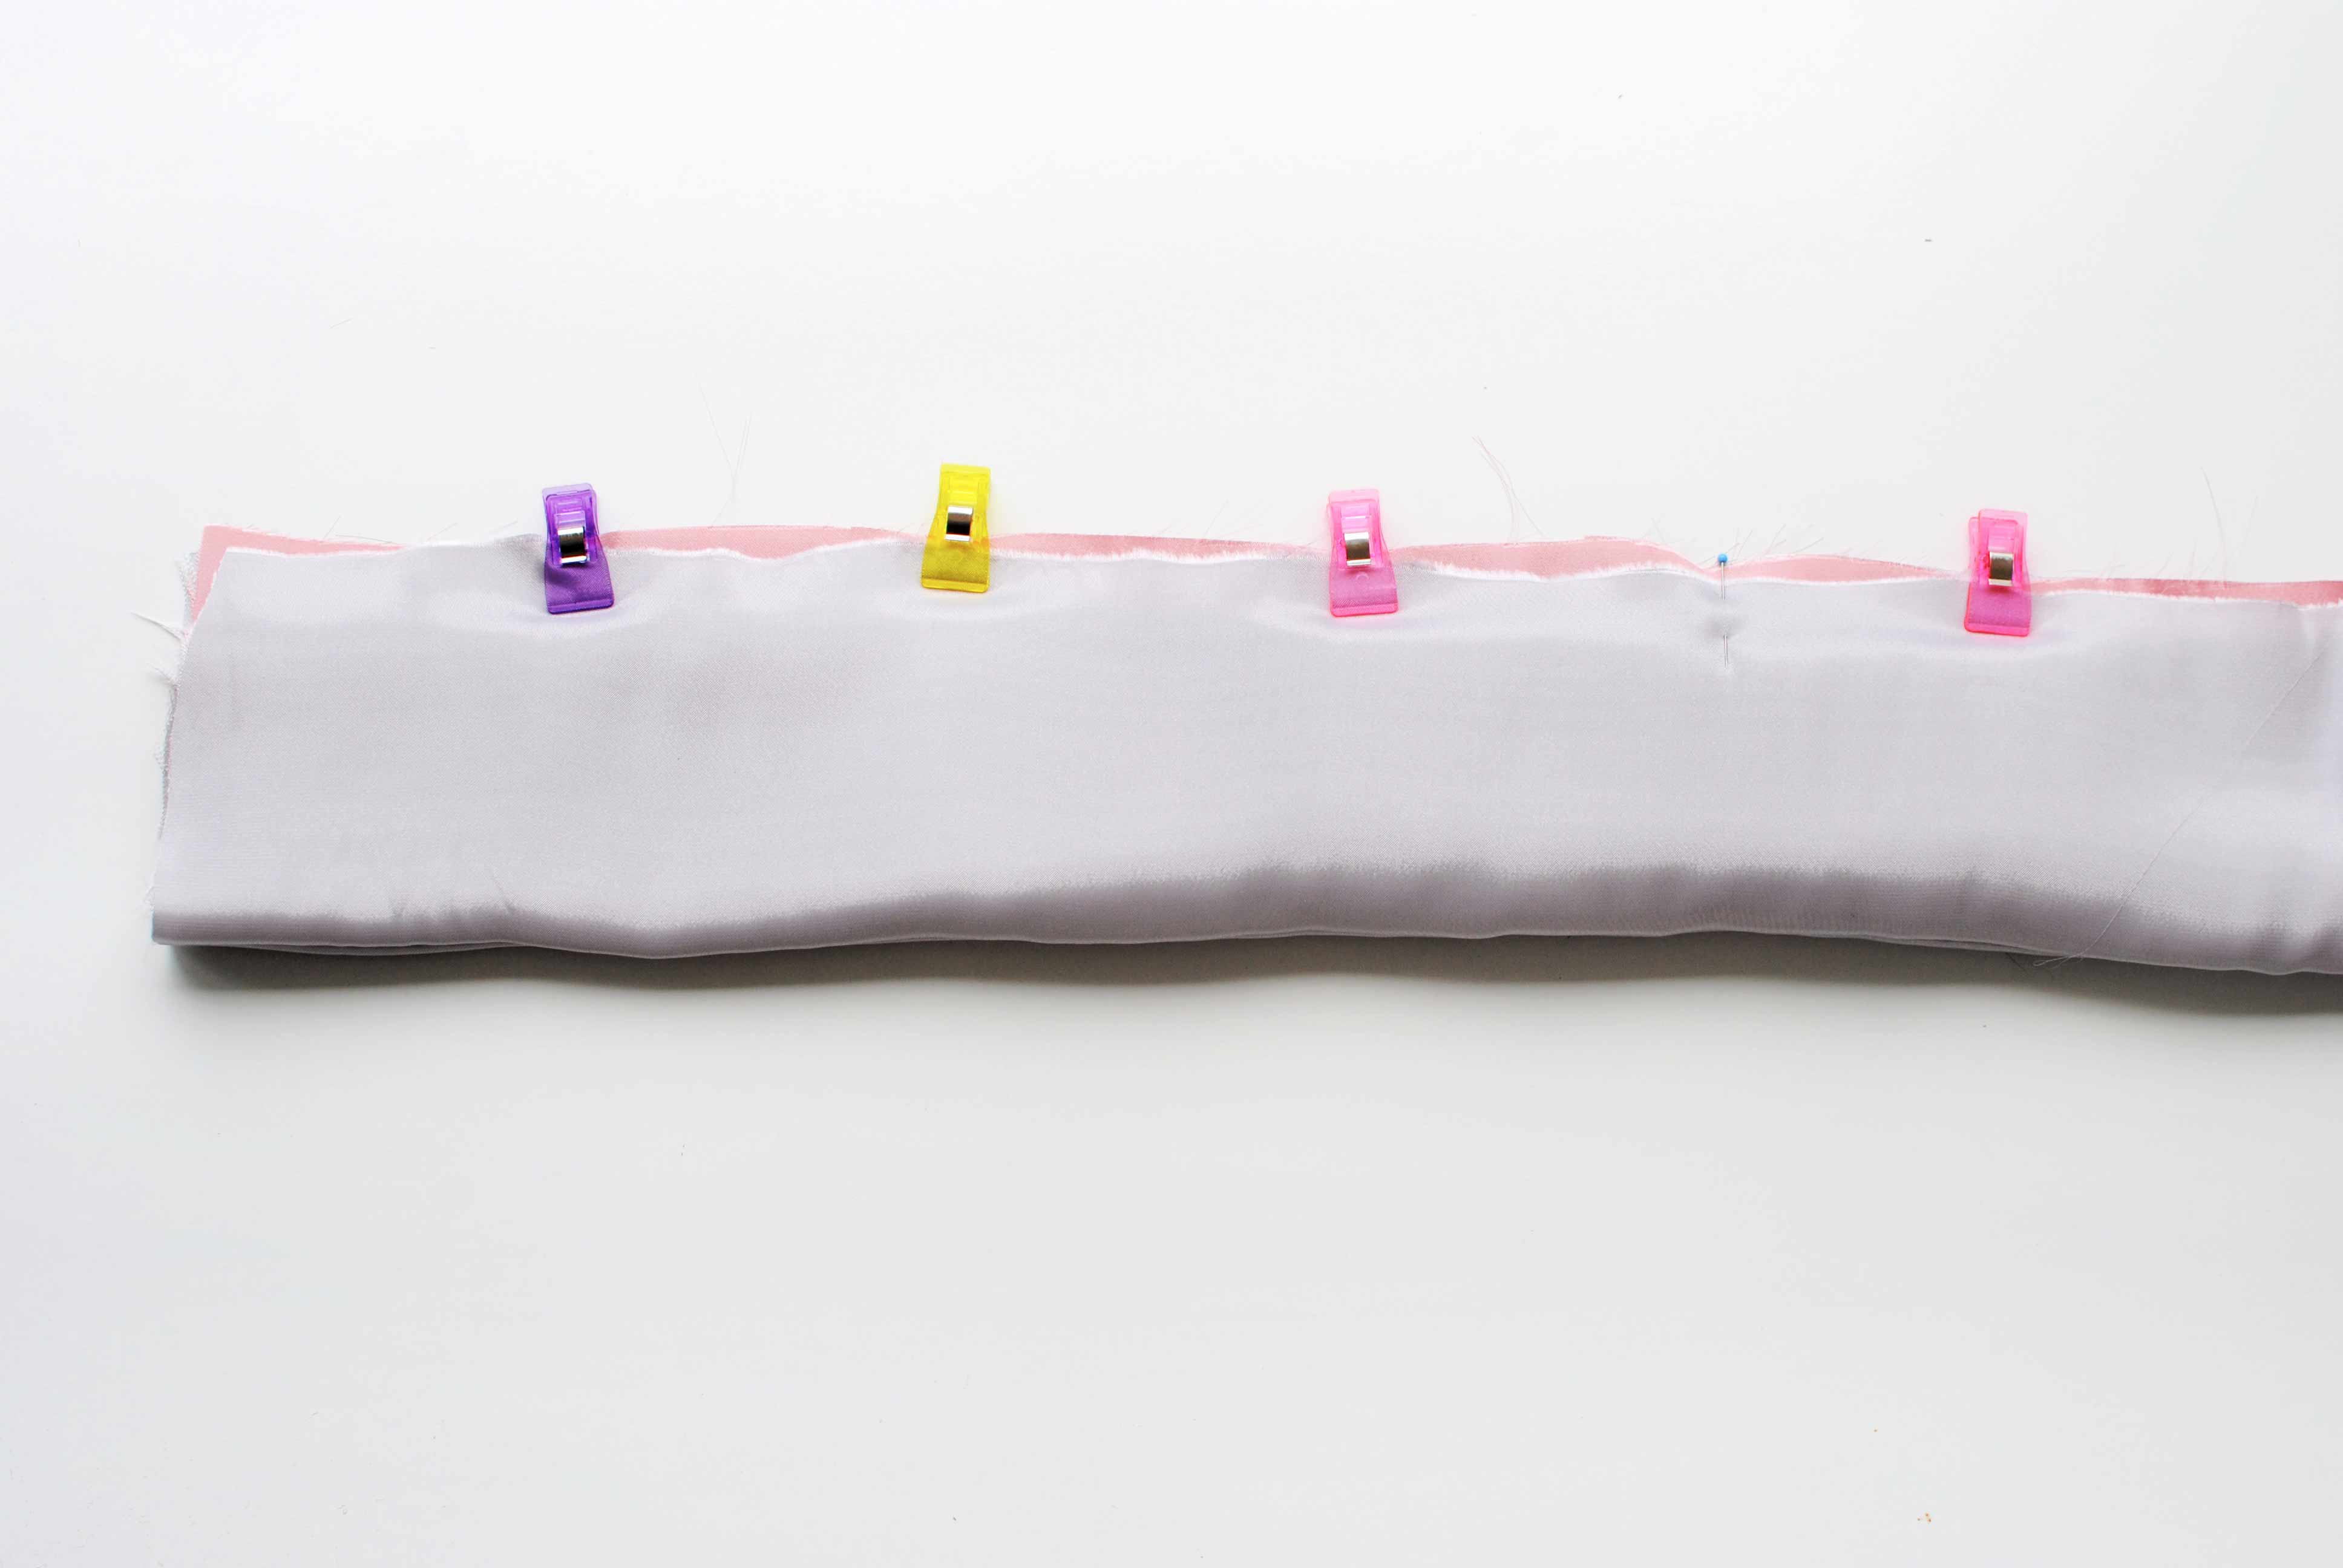 how to sew a pillowcase roll your fabric like a burrito